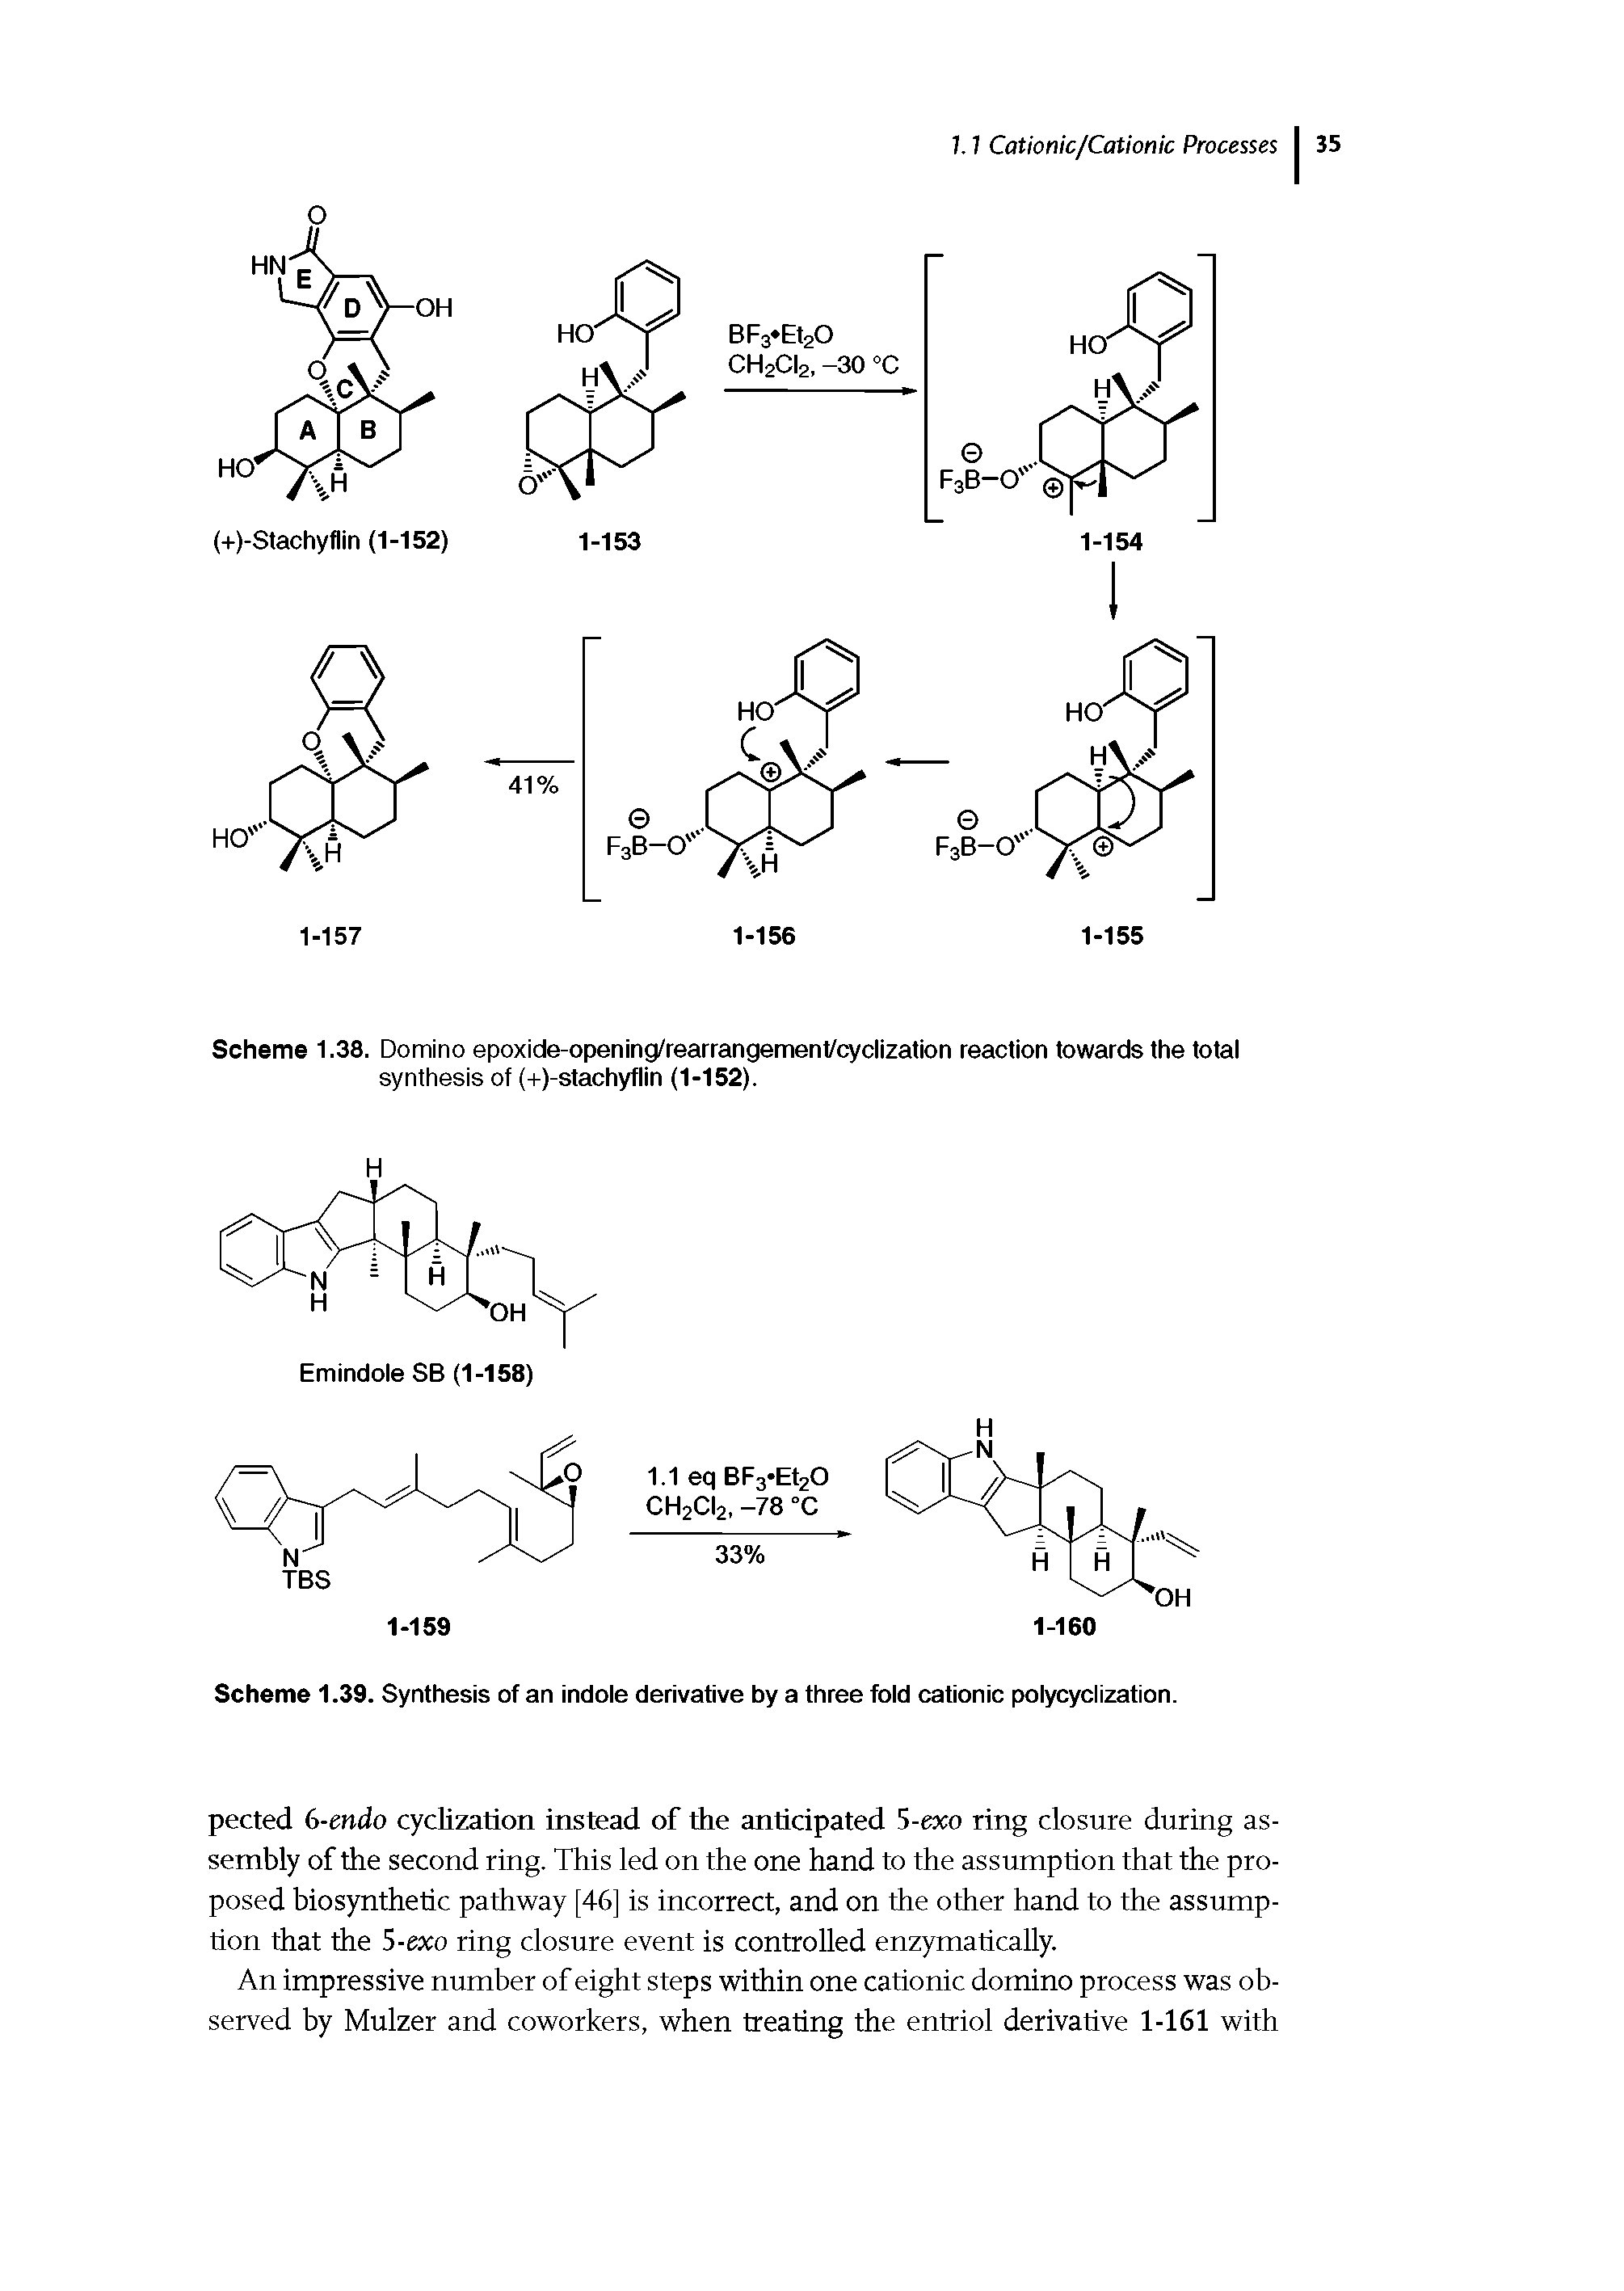 Scheme 1.38. Domino epoxide-opening/rearrangemenl/cyclization reaction towards the total synthesis of (+)-stachyflin (1-152).